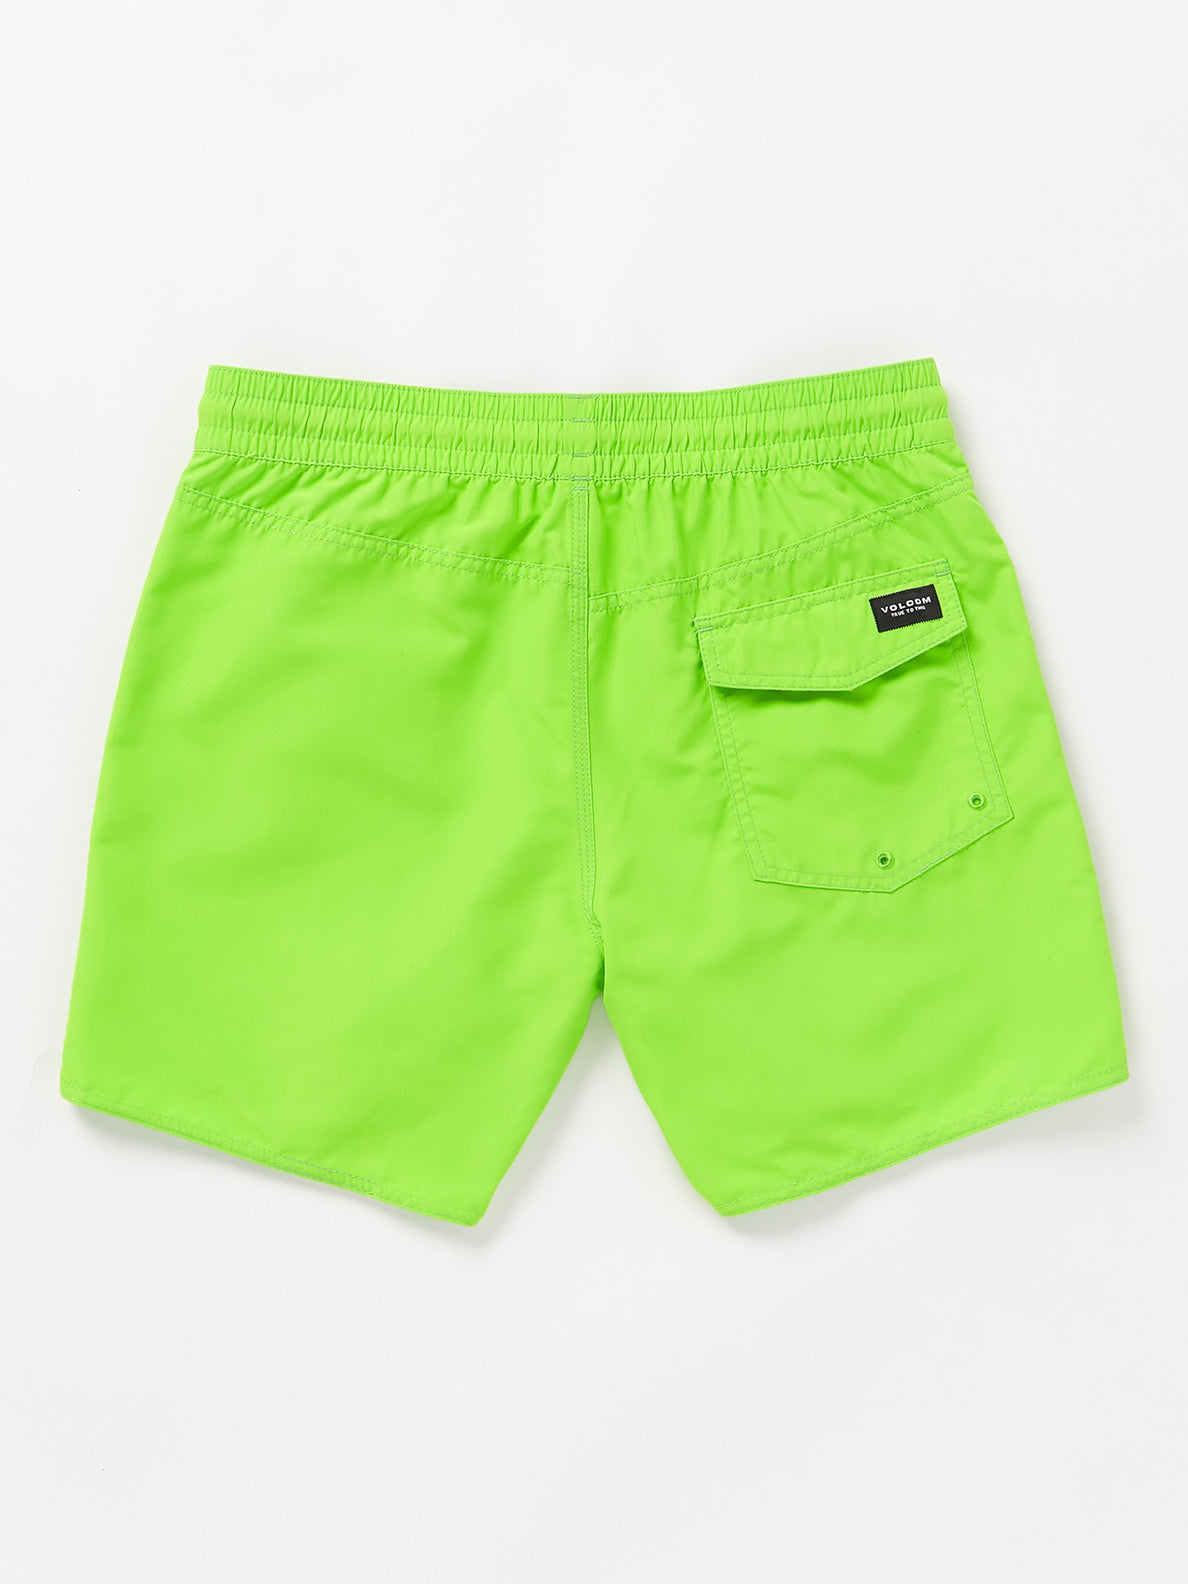 Lido Solid Trunks - Electric Green